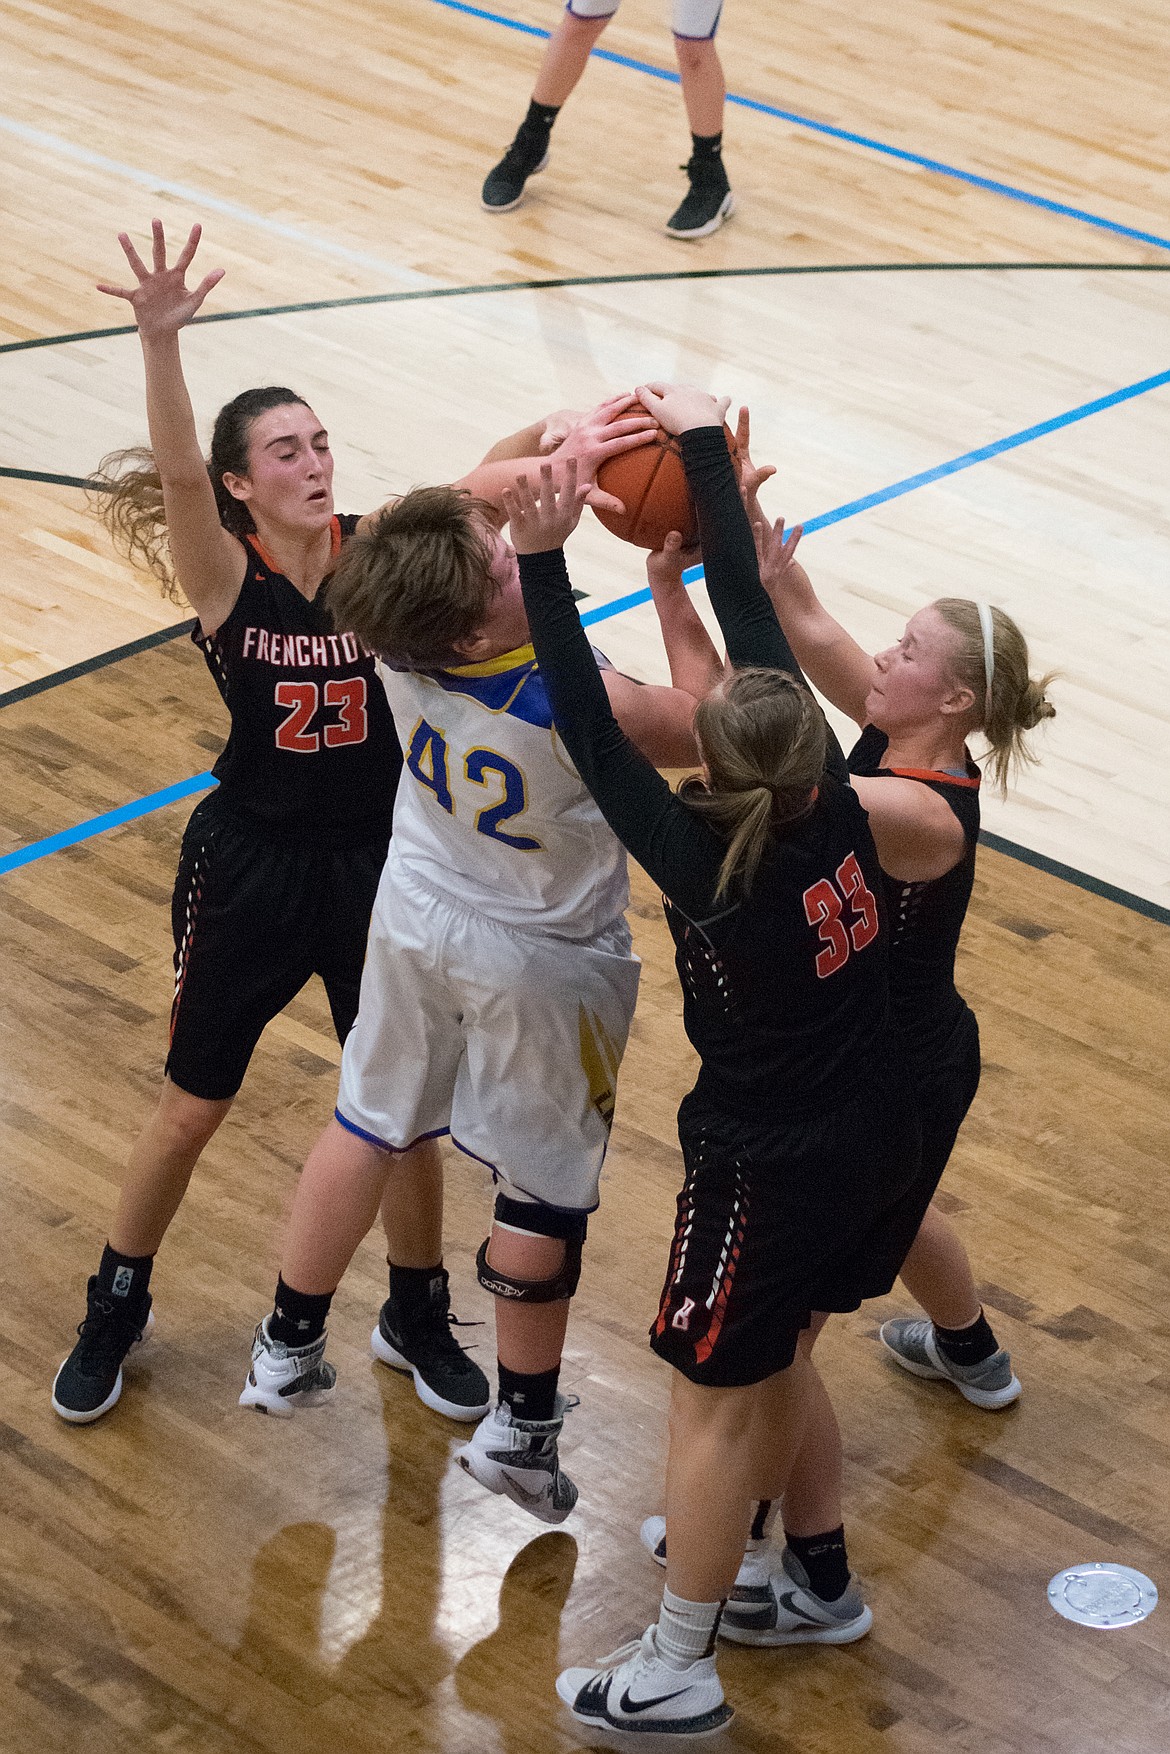 Though Libby&#146;s Shannon Reny was denied a basket by the Frenchtown defense, the resulting foul sent her to the free throw line, where she made Libby&#146;s only point of the third quarter. (Ben Kibbey/The Western News)